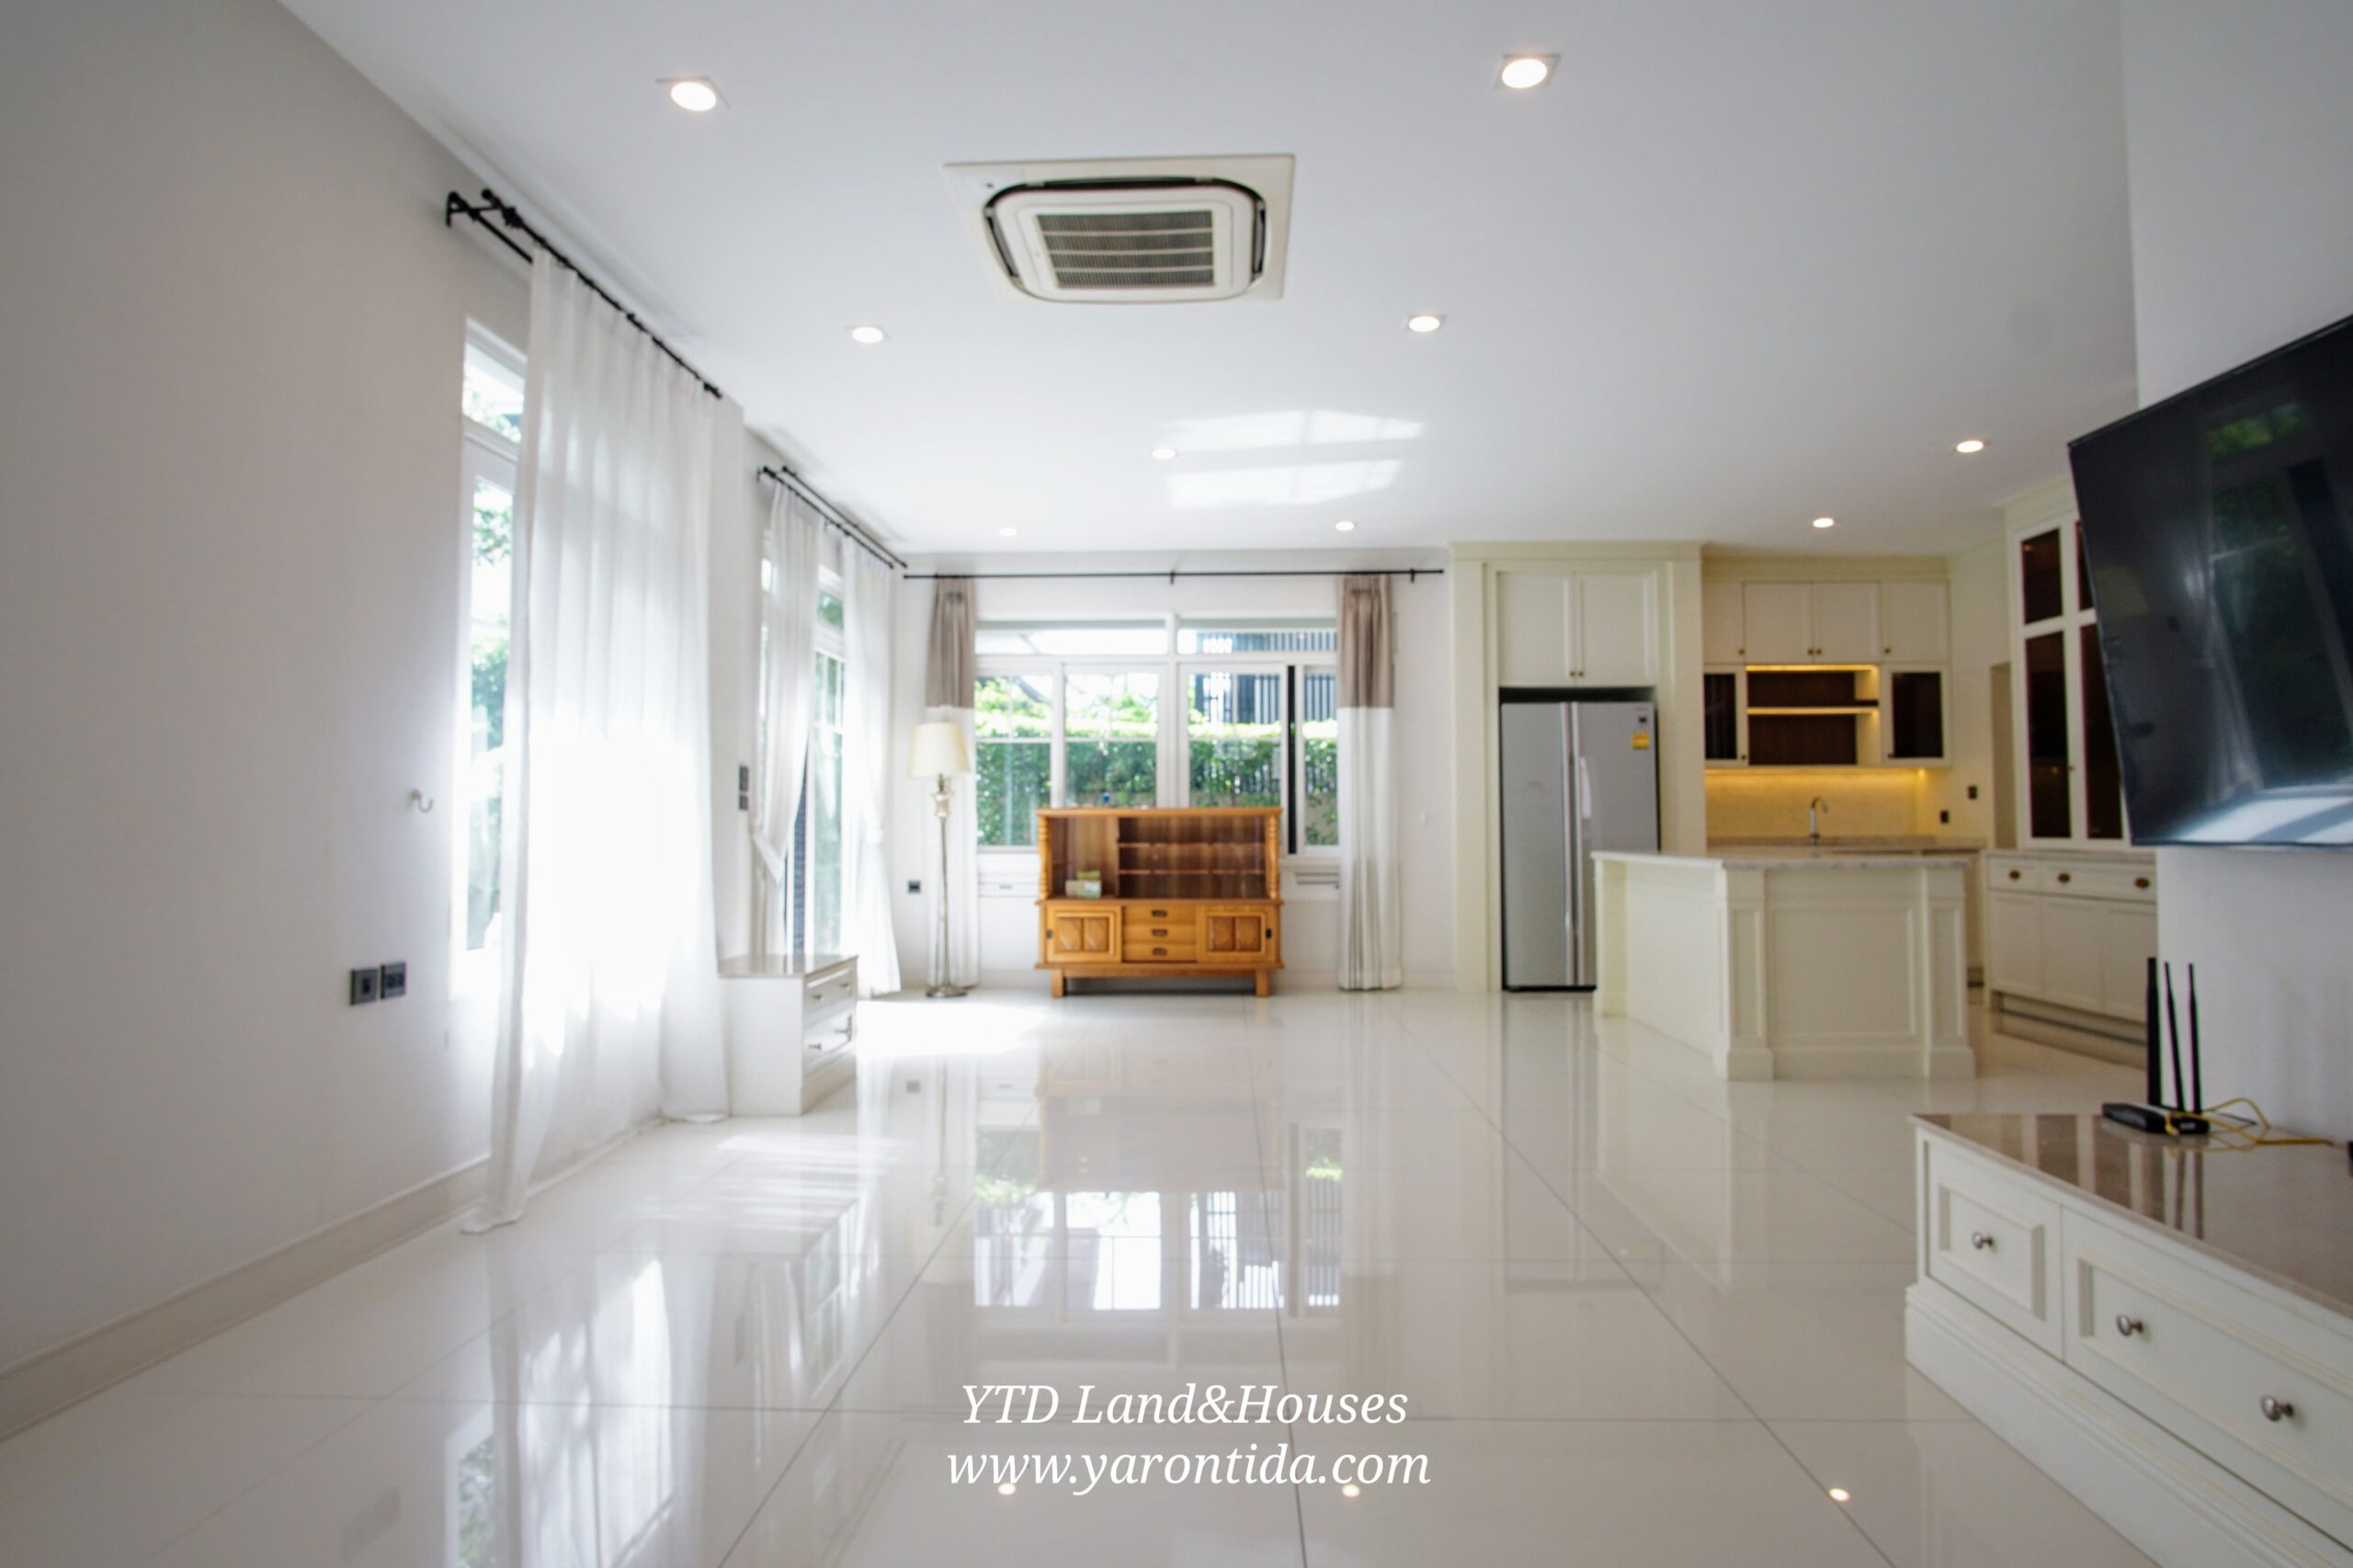 Luxury house for Rent at Nantawan Bangna KM.7 110,000 baht/month (Fully furnished)